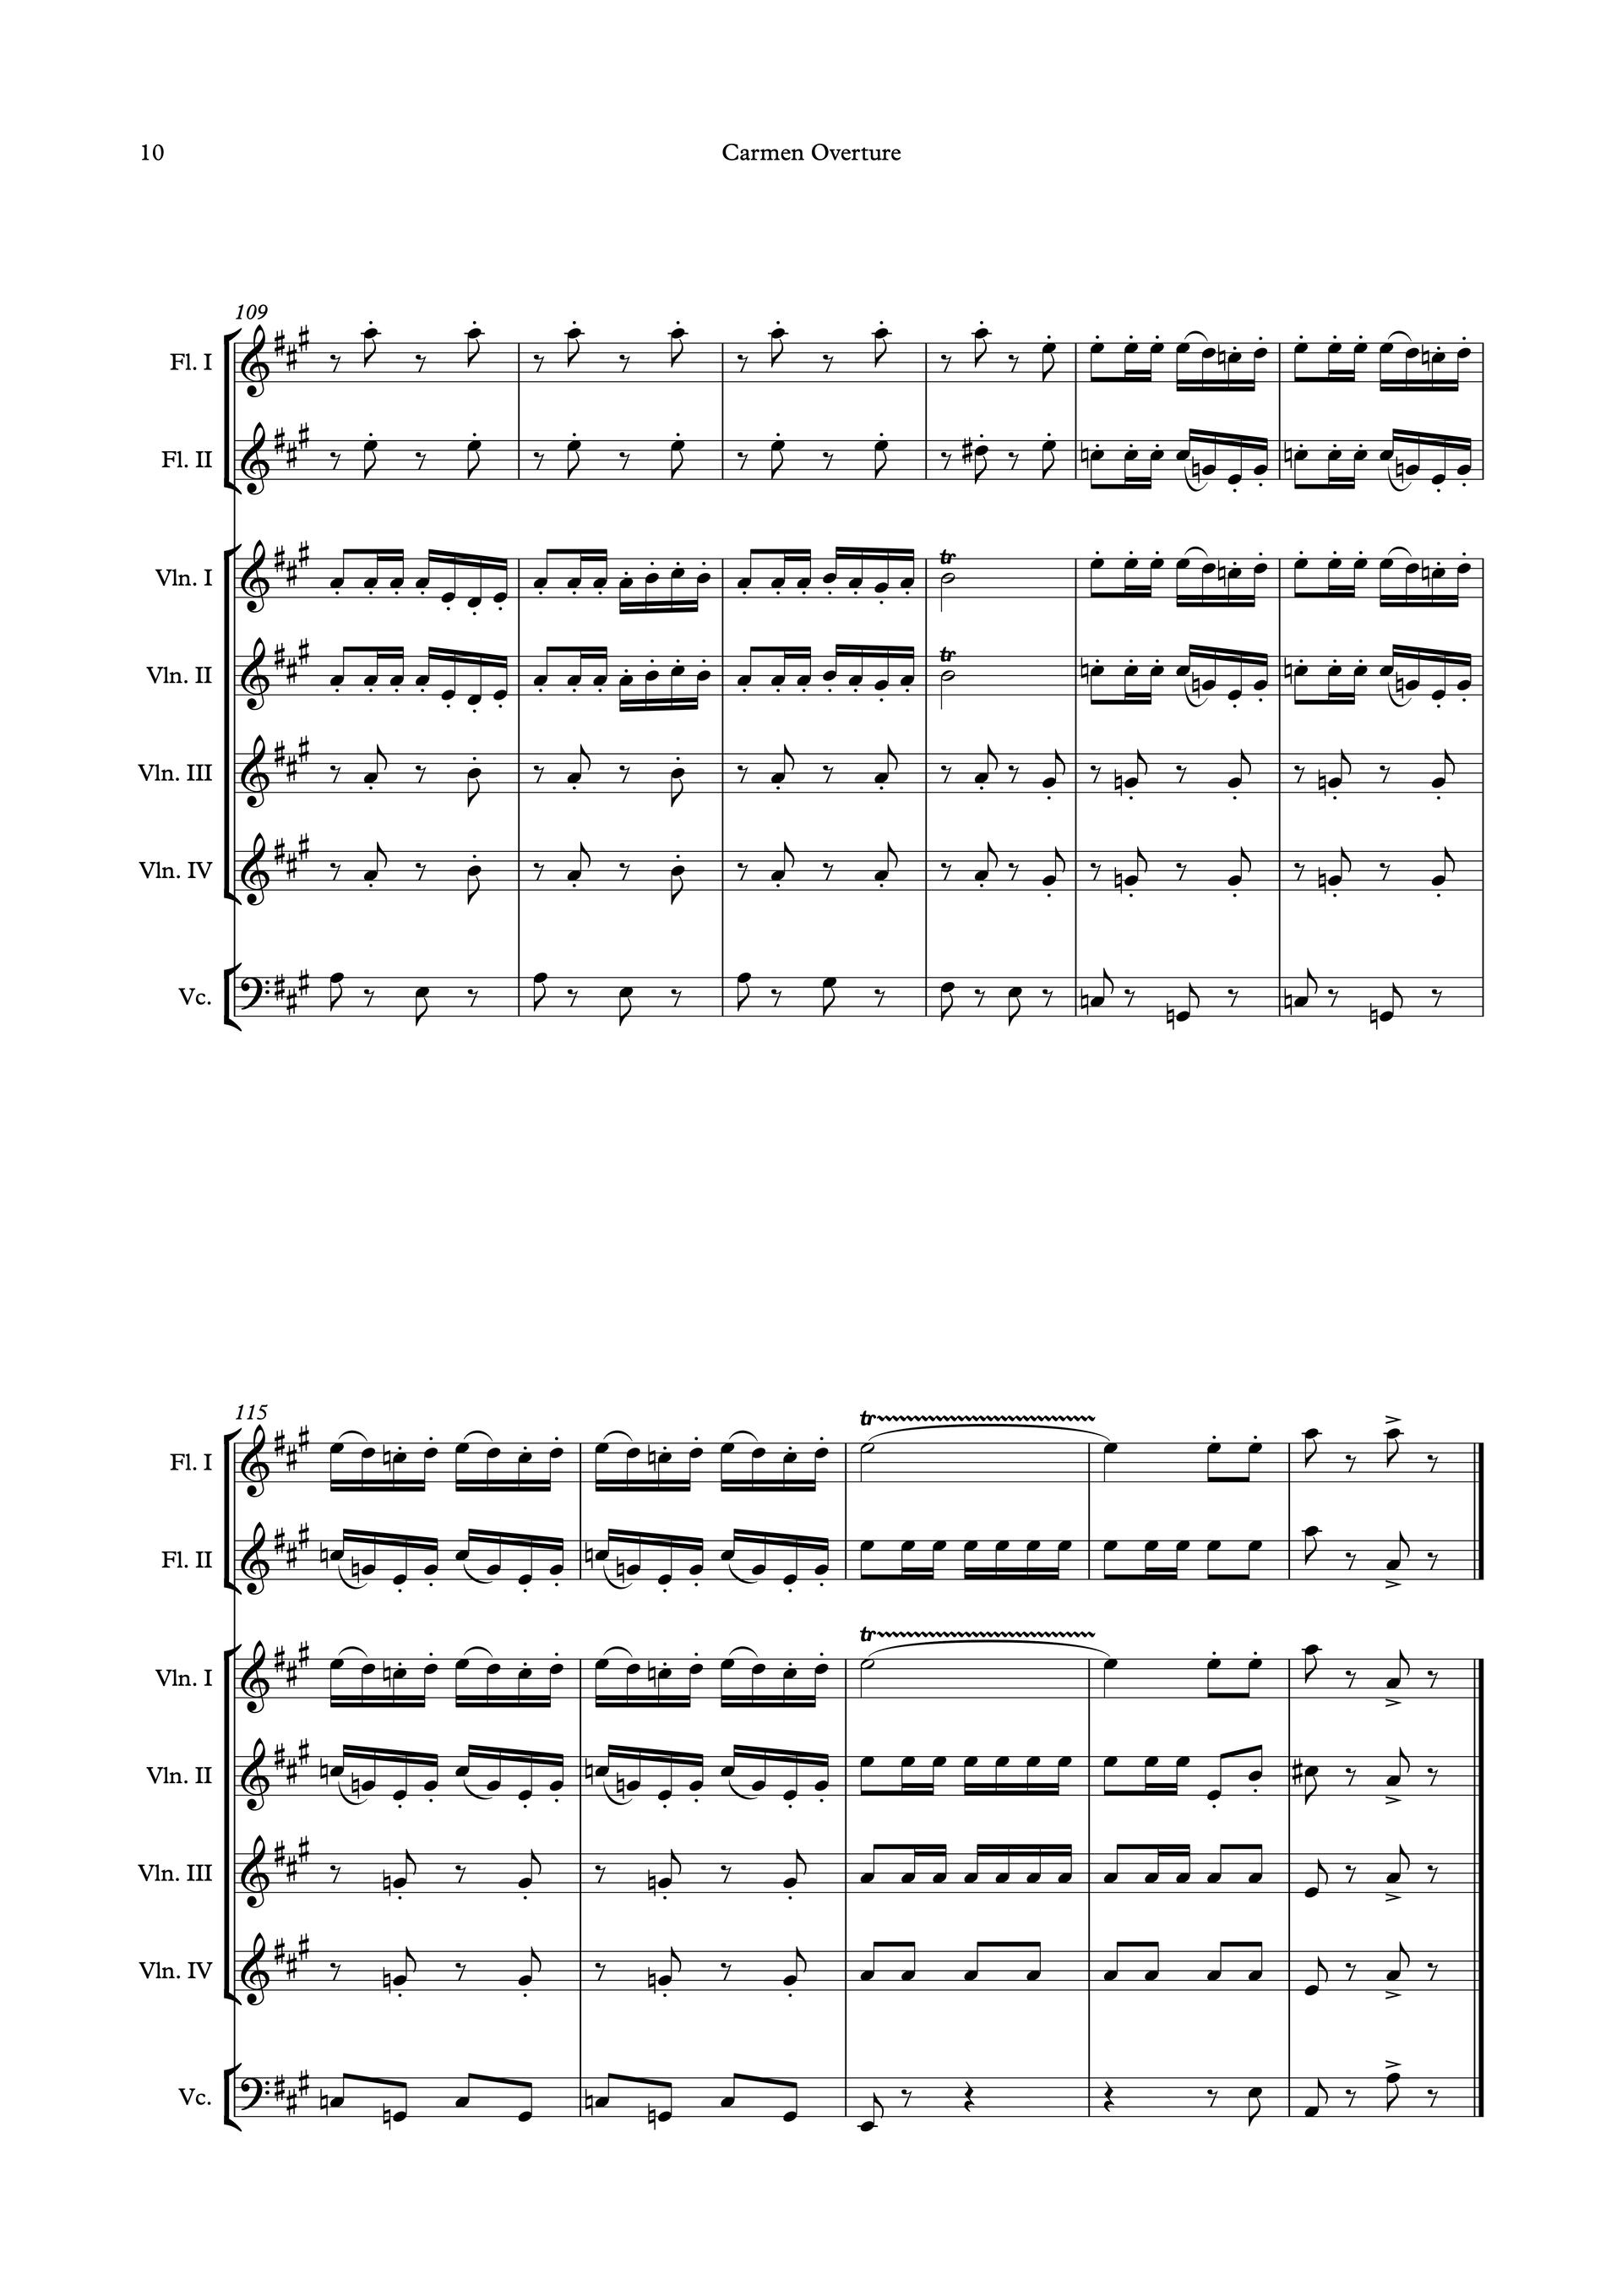 Sheet music of Bijet's Carmen Overture arranged for saxophone septet preview page 10